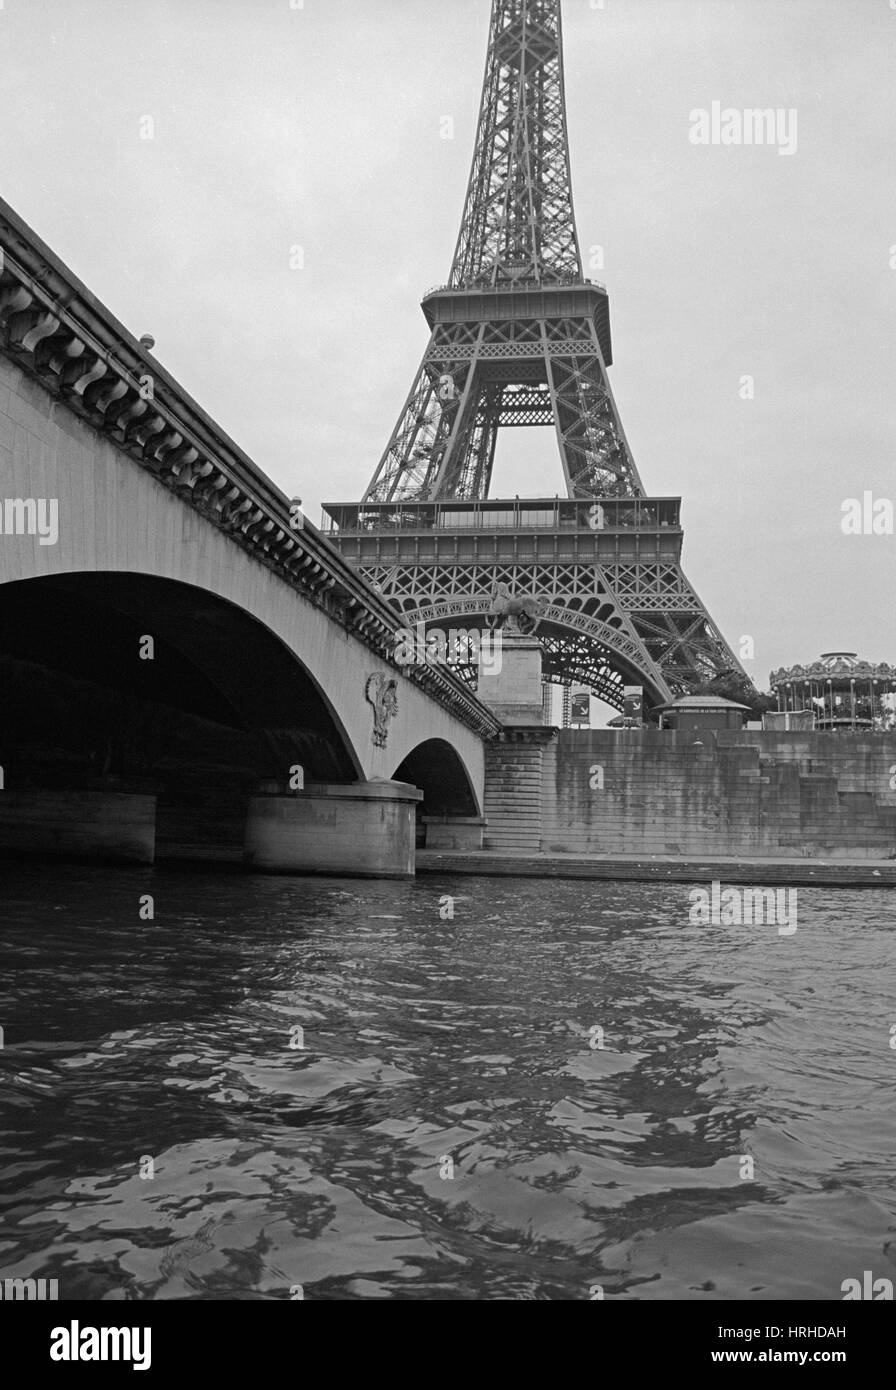 Eiffel Tower in Paris from the River Seine in black and white. Stock Photo